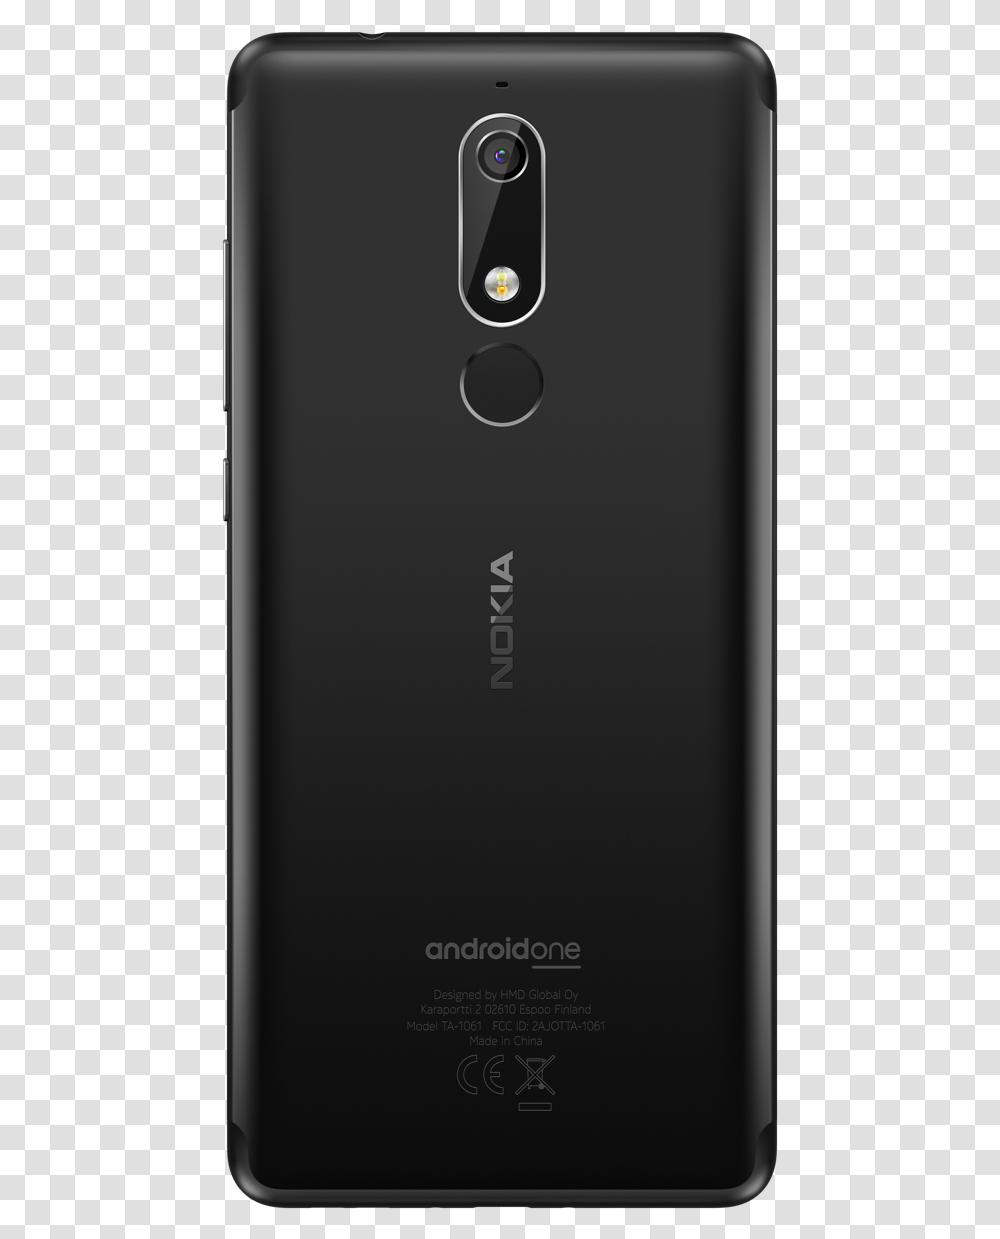 Nokia, Mobile Phone, Electronics, Cell Phone, Iphone Transparent Png